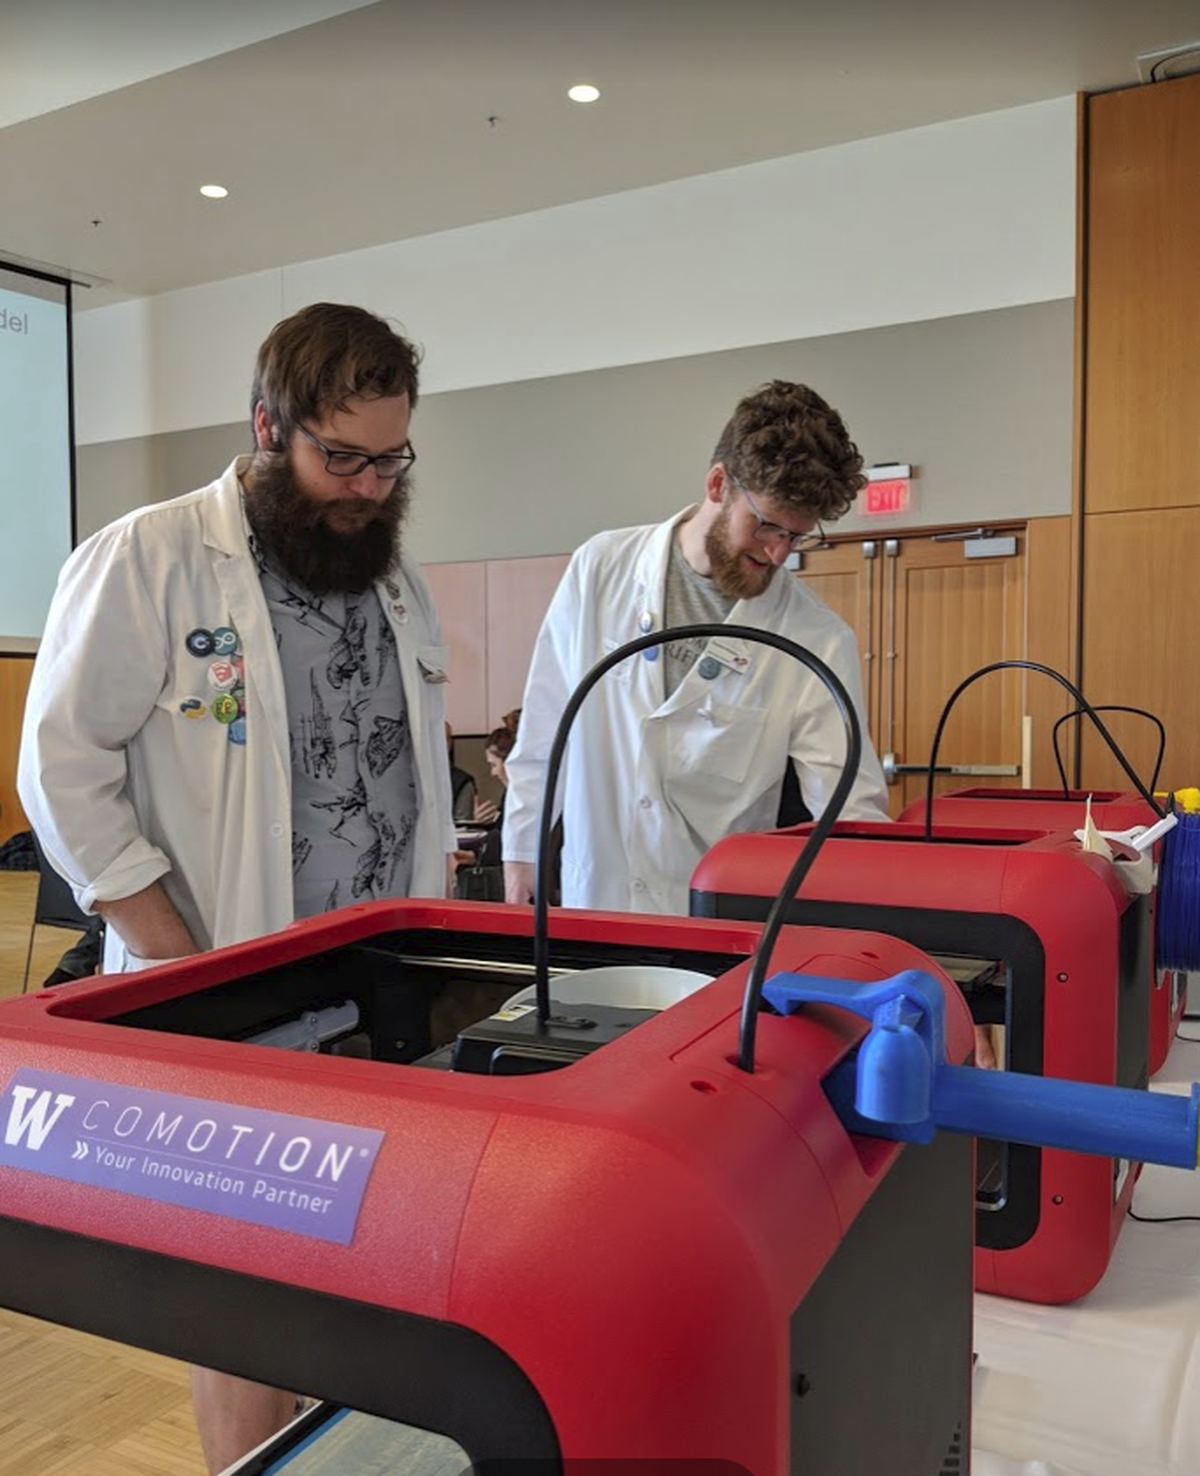 Scott Griffith and Daniel Mobley from Gonzaga’s Next Gen Tech Bar lead a laser-cutting demo on 3D printers at one of CoMotion @ Spokane’s events to promote innovation and entrepreneurship. (Courtesy University of Washington)